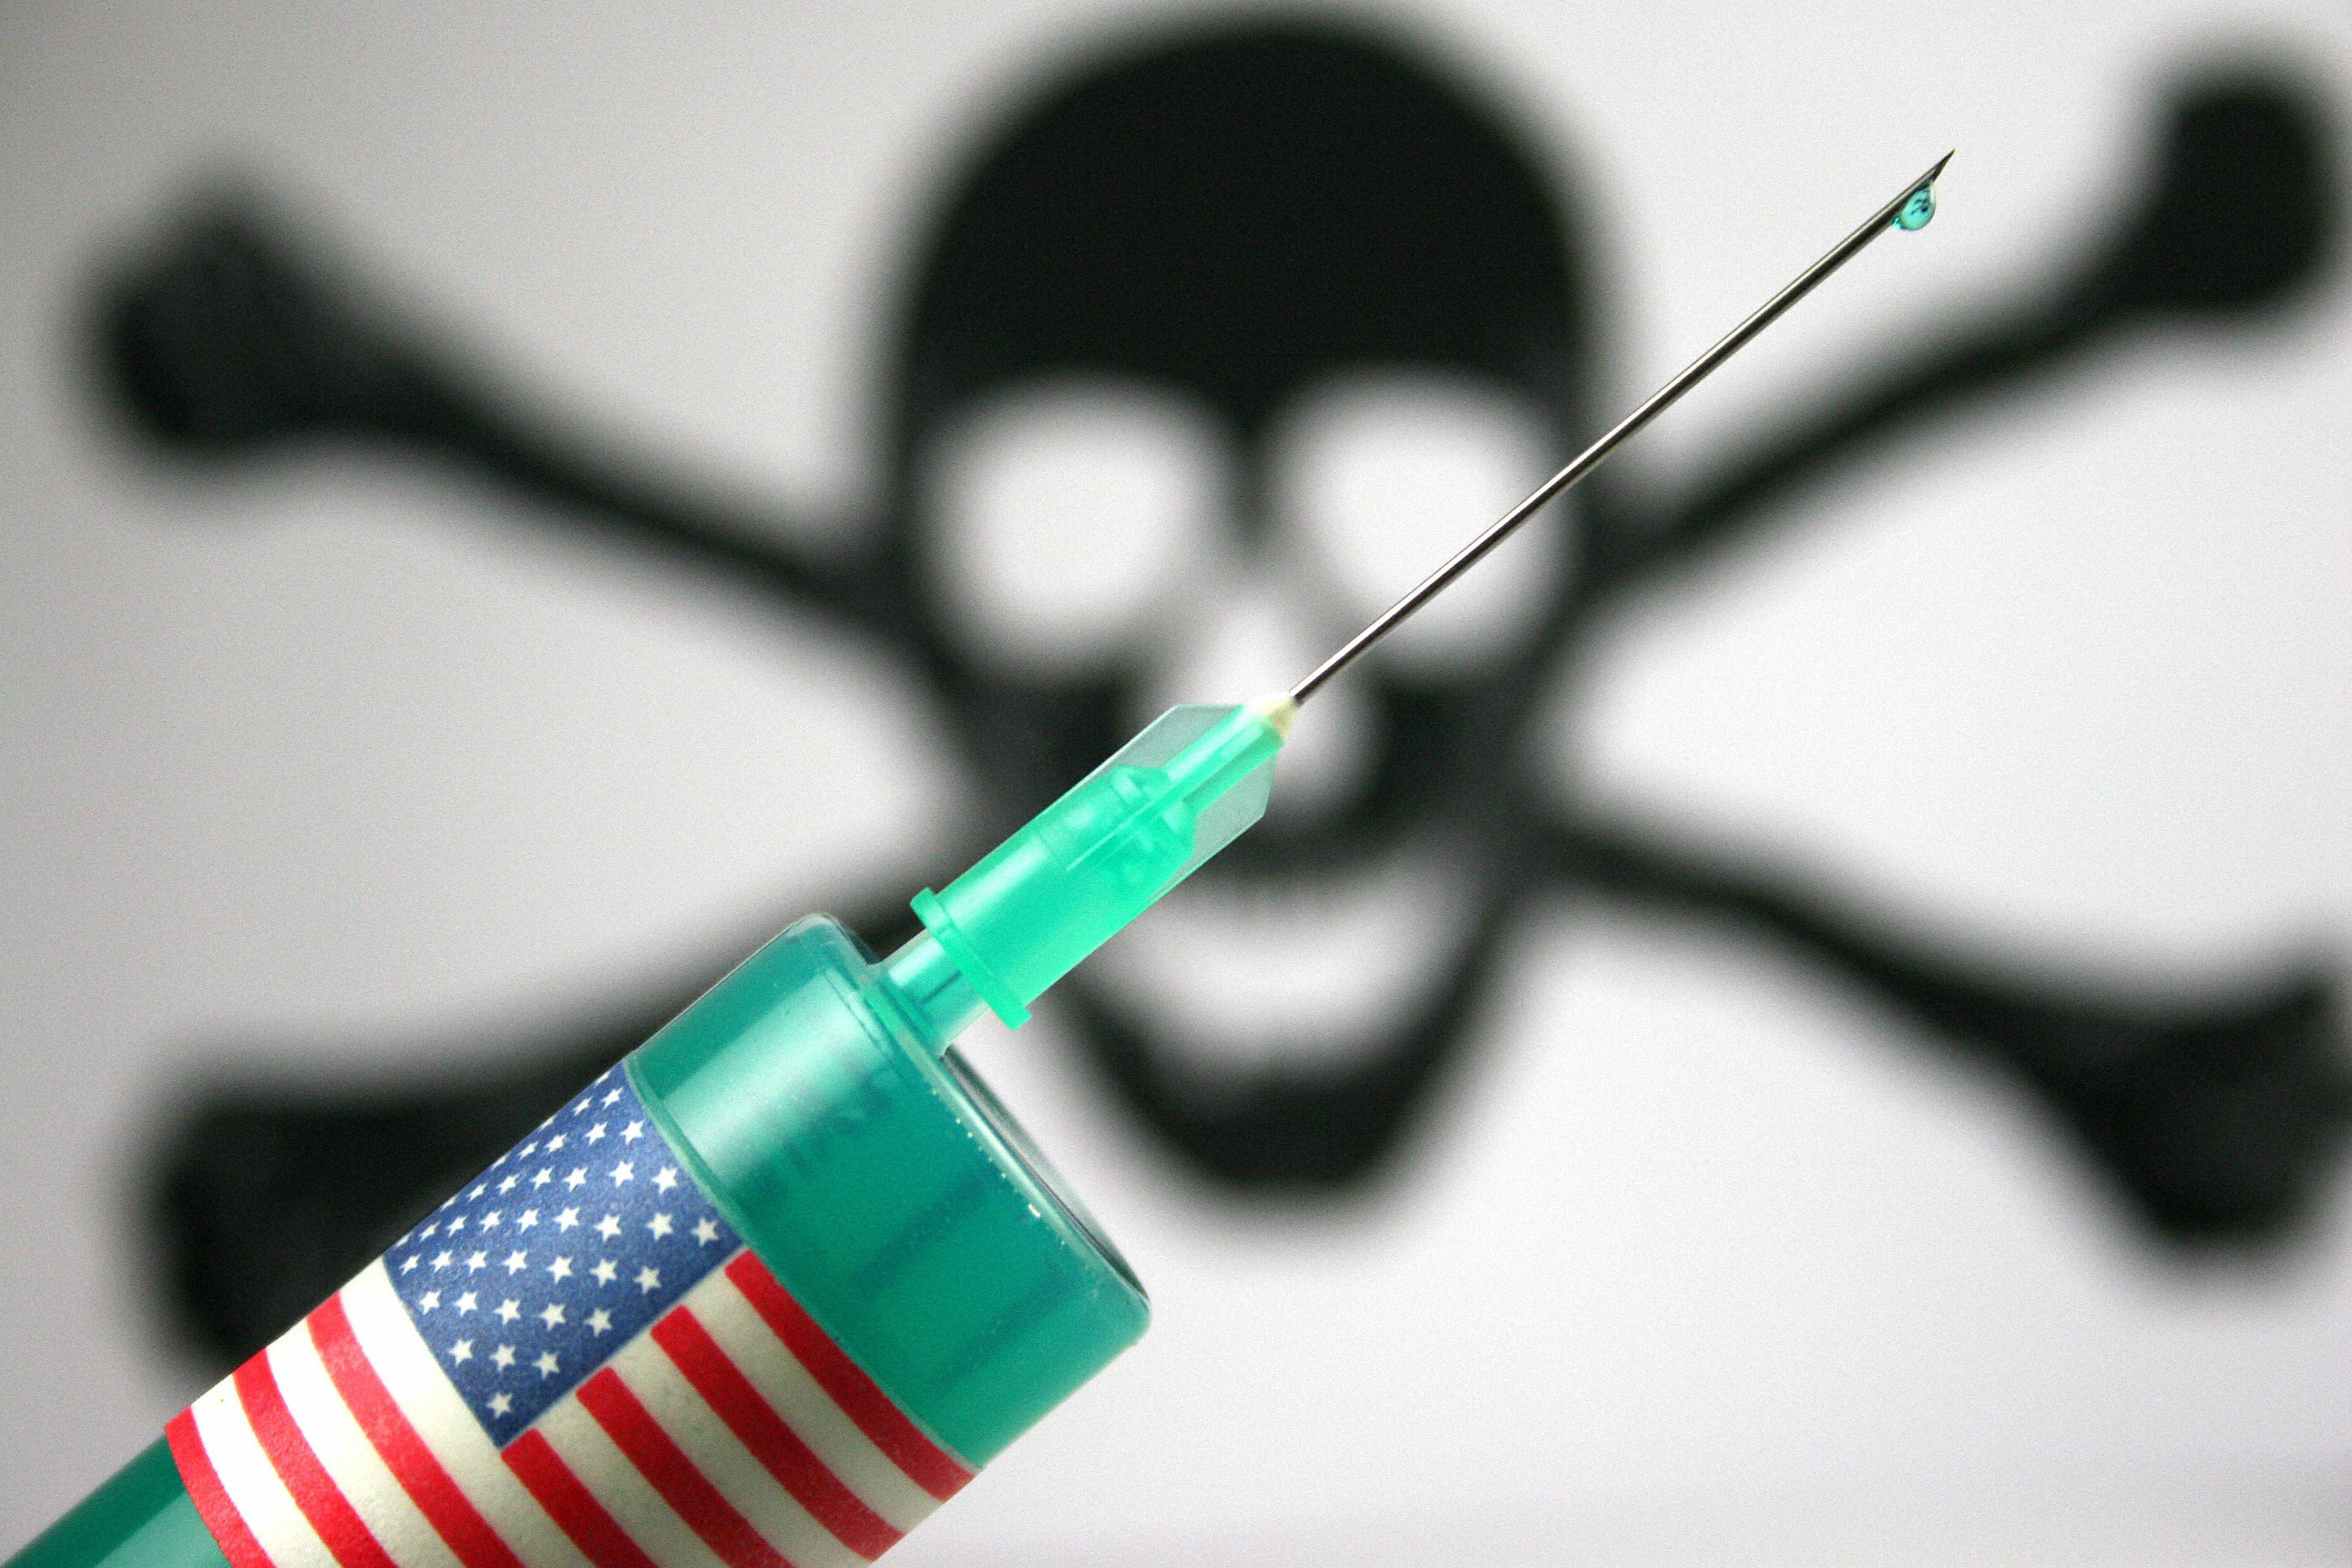 A green syringe, which is used for lethal injections, is wrapped in an American flag sticker.  